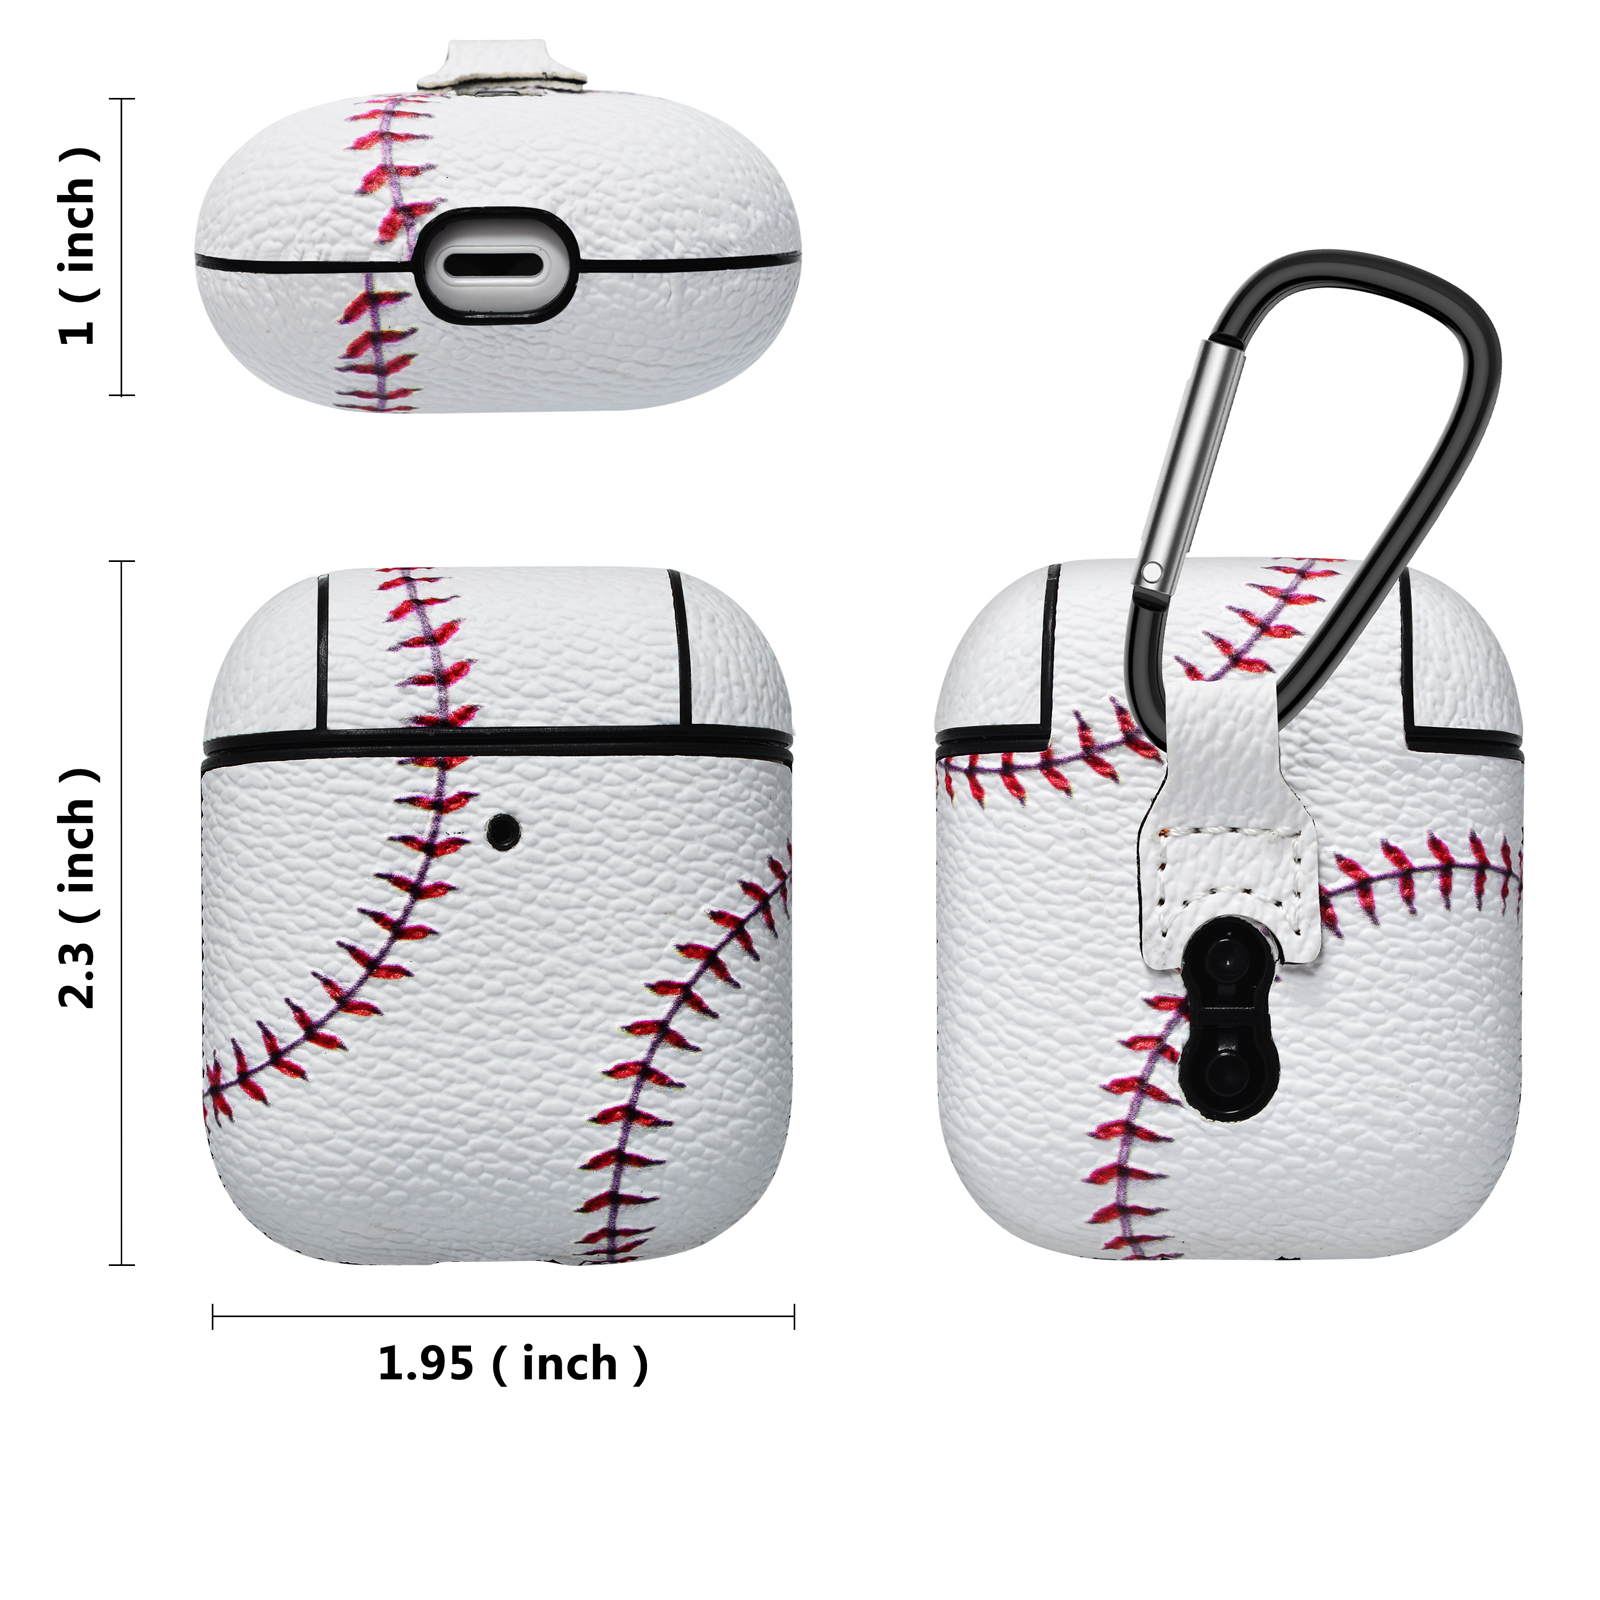 Apple Airpods Case Skin, Takfox AirPods Accessories Case for Airpods 1 & 2 Portable Protective Anti-Scratch PU Leather Cover Skin for Airpods 1 & AirPods 2 [Front LED Visible] w/ Keychain - Baseball - image 2 of 9